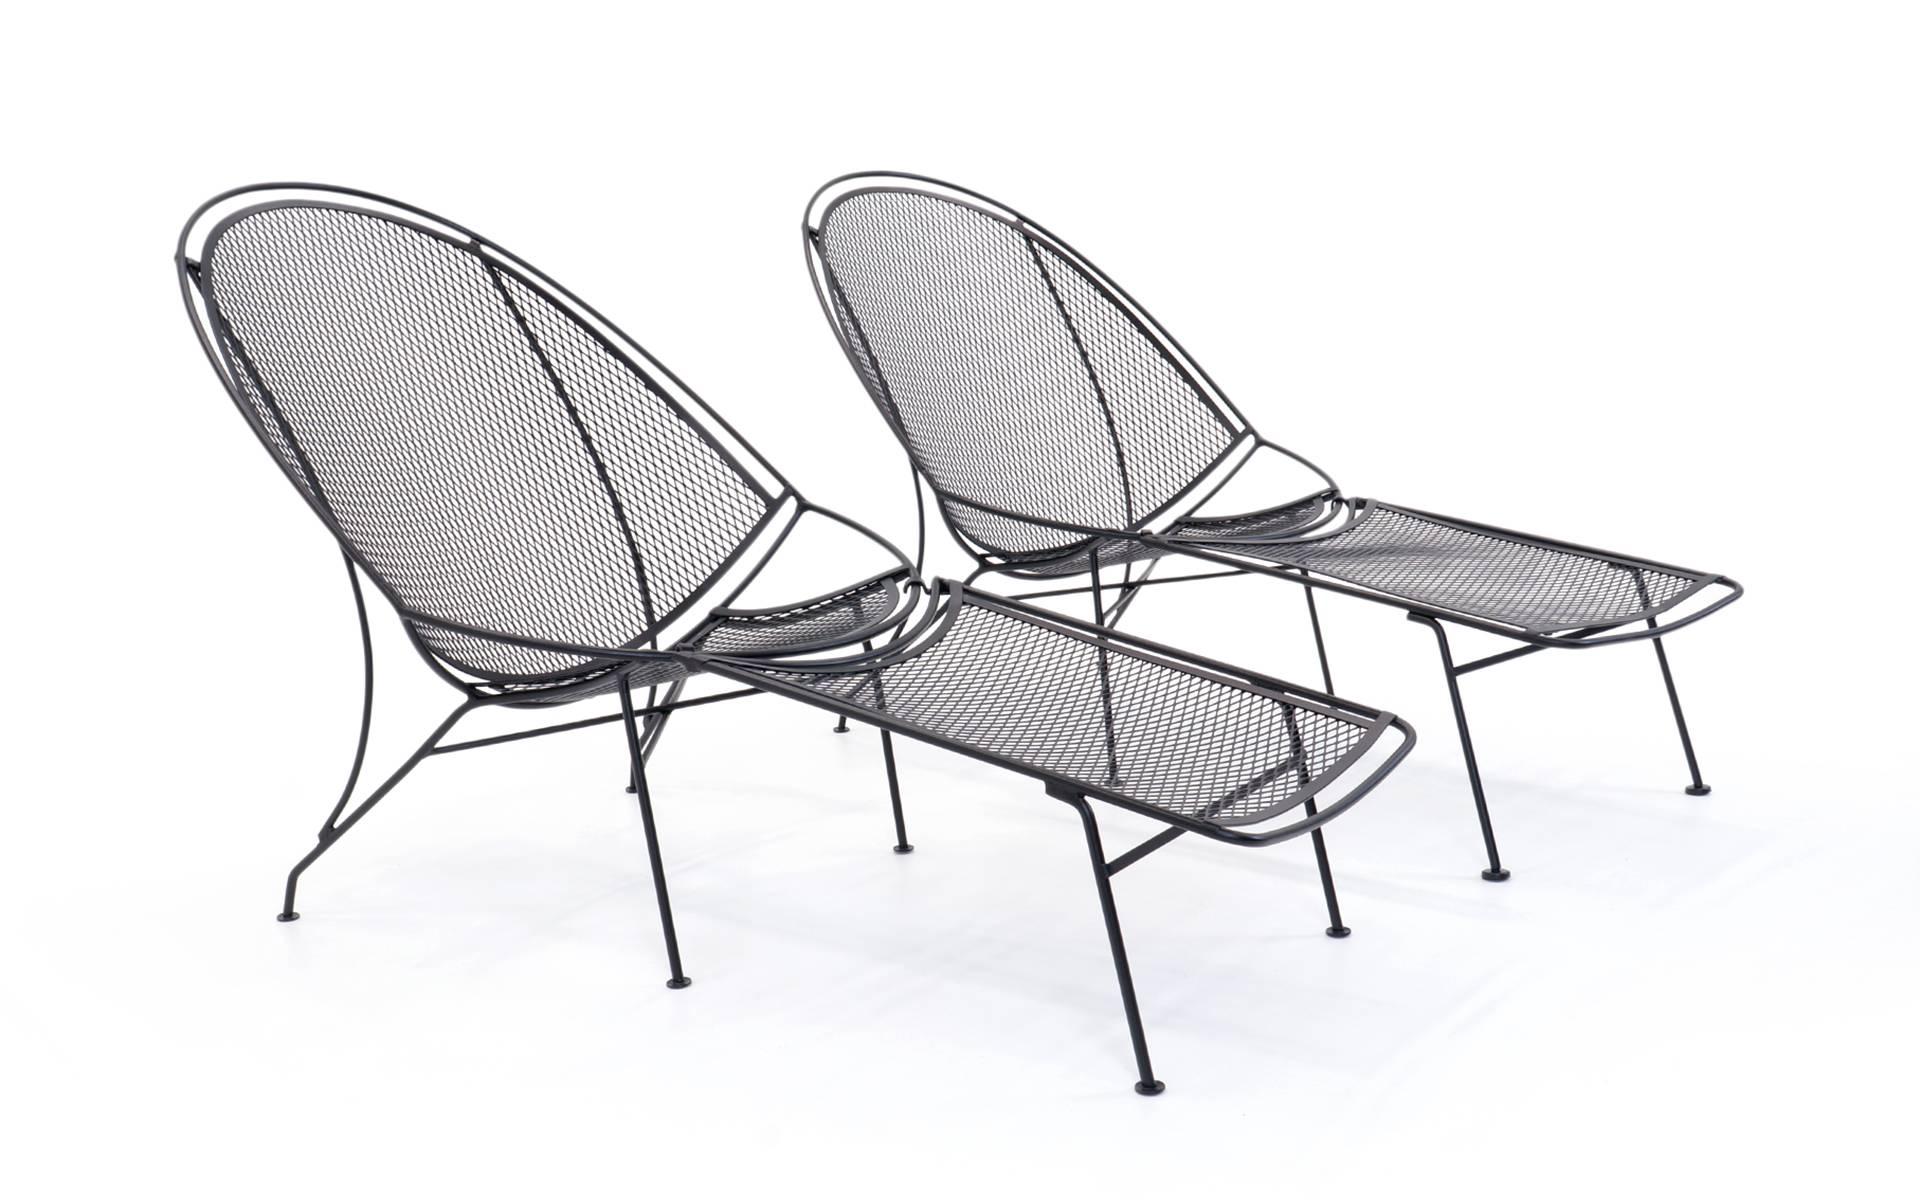 Pair of rare and desirable high back lounge chair with removable footrest / ottoman, designed and made by the John Salterini Company, Brooklyn NY, 1965. These have been professionally media blasted and powder coated in a satin, slightly textured